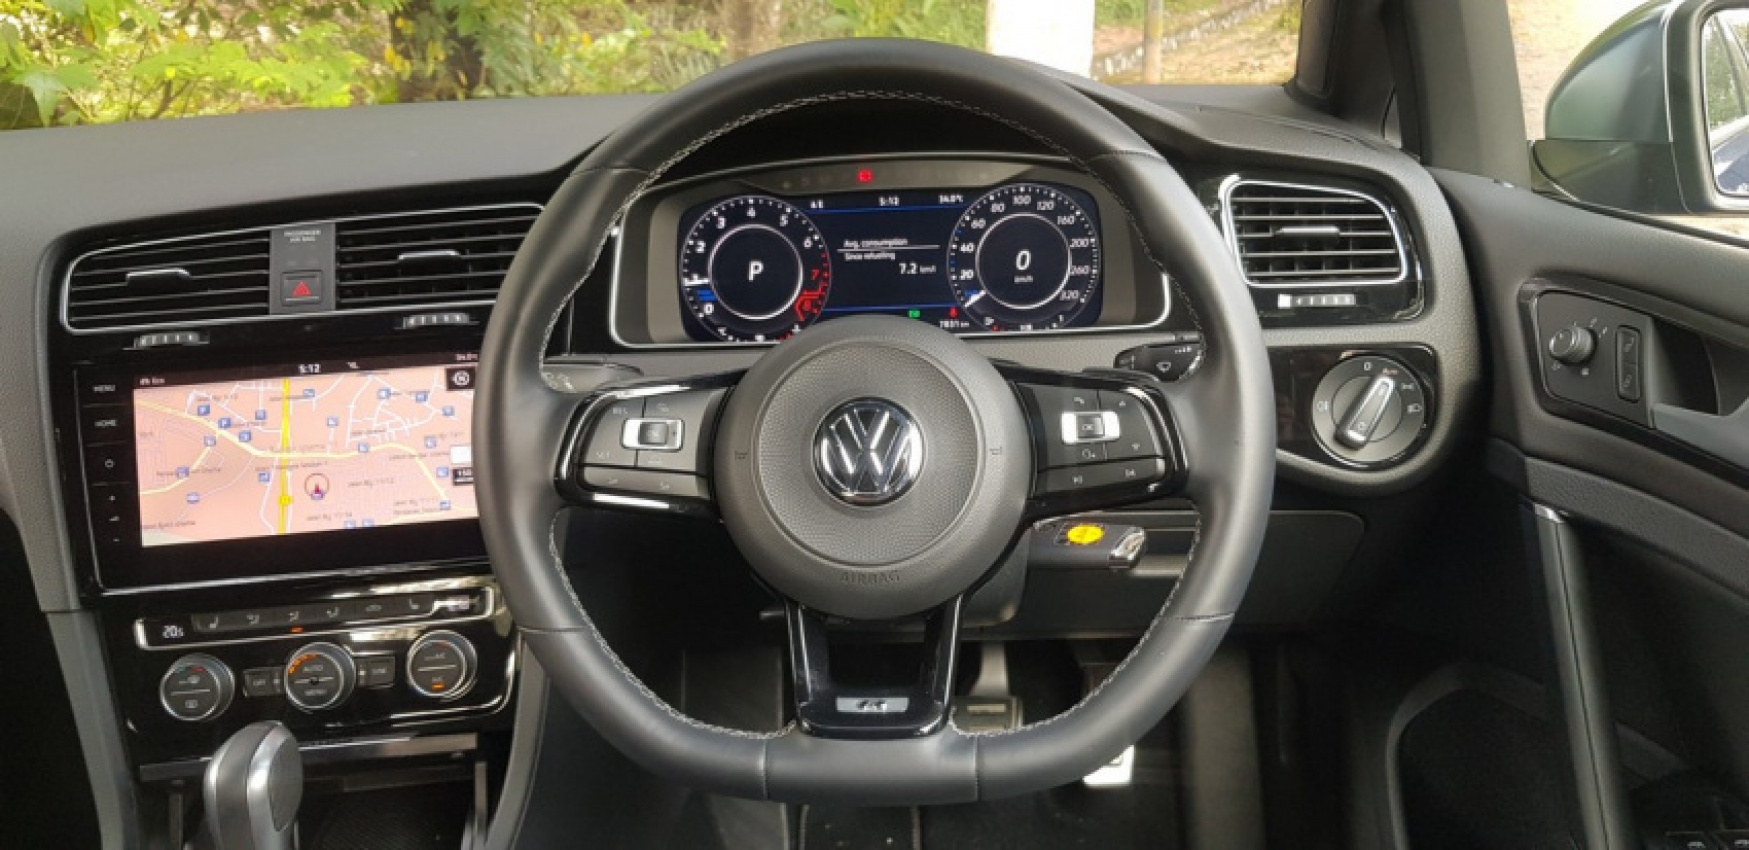 autos, car brands, cars, volkswagen, automotive, hatchback, review, test drive, volkswagen passenger cars malaysia, volkswagen golf 7.5 r – more fun to offer